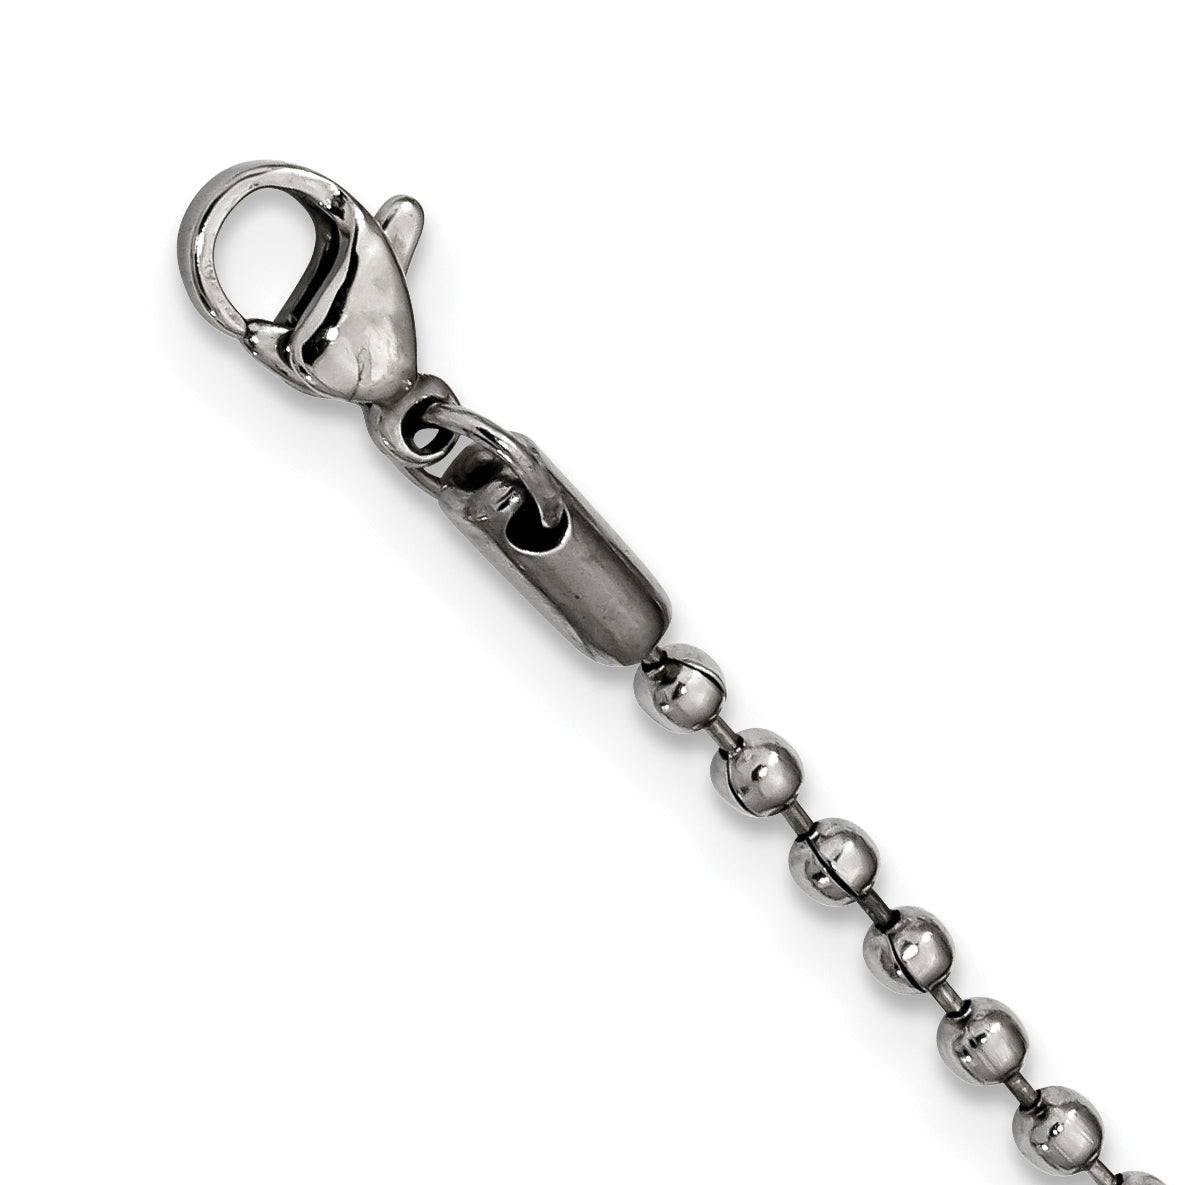 Chisel Stainless Steel Polished and Textured 2 Piece Cross Dog Tag on a 24 inch Ball Chain Necklace